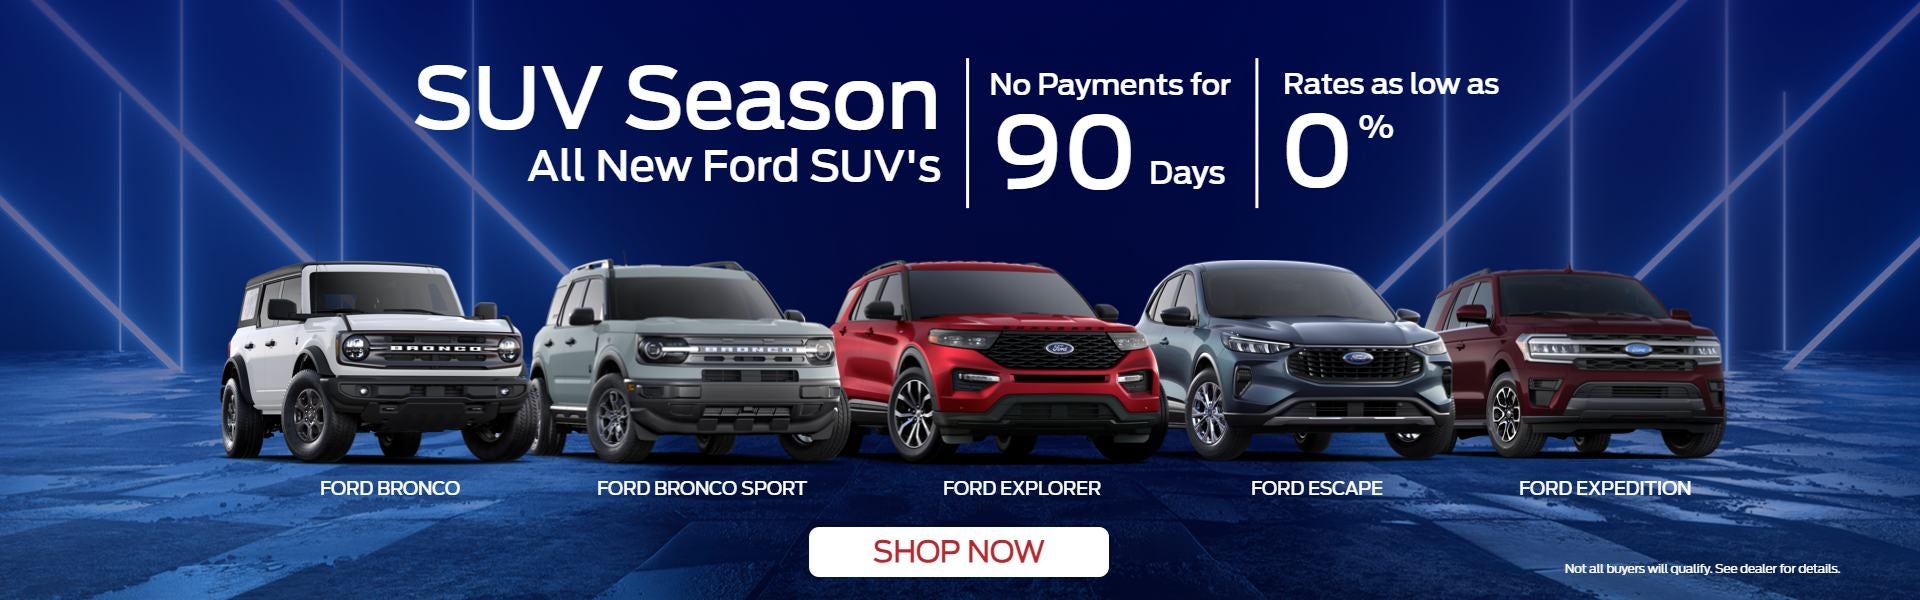 SUV Season | No Payments For 90 Days / Rates as low as 0%